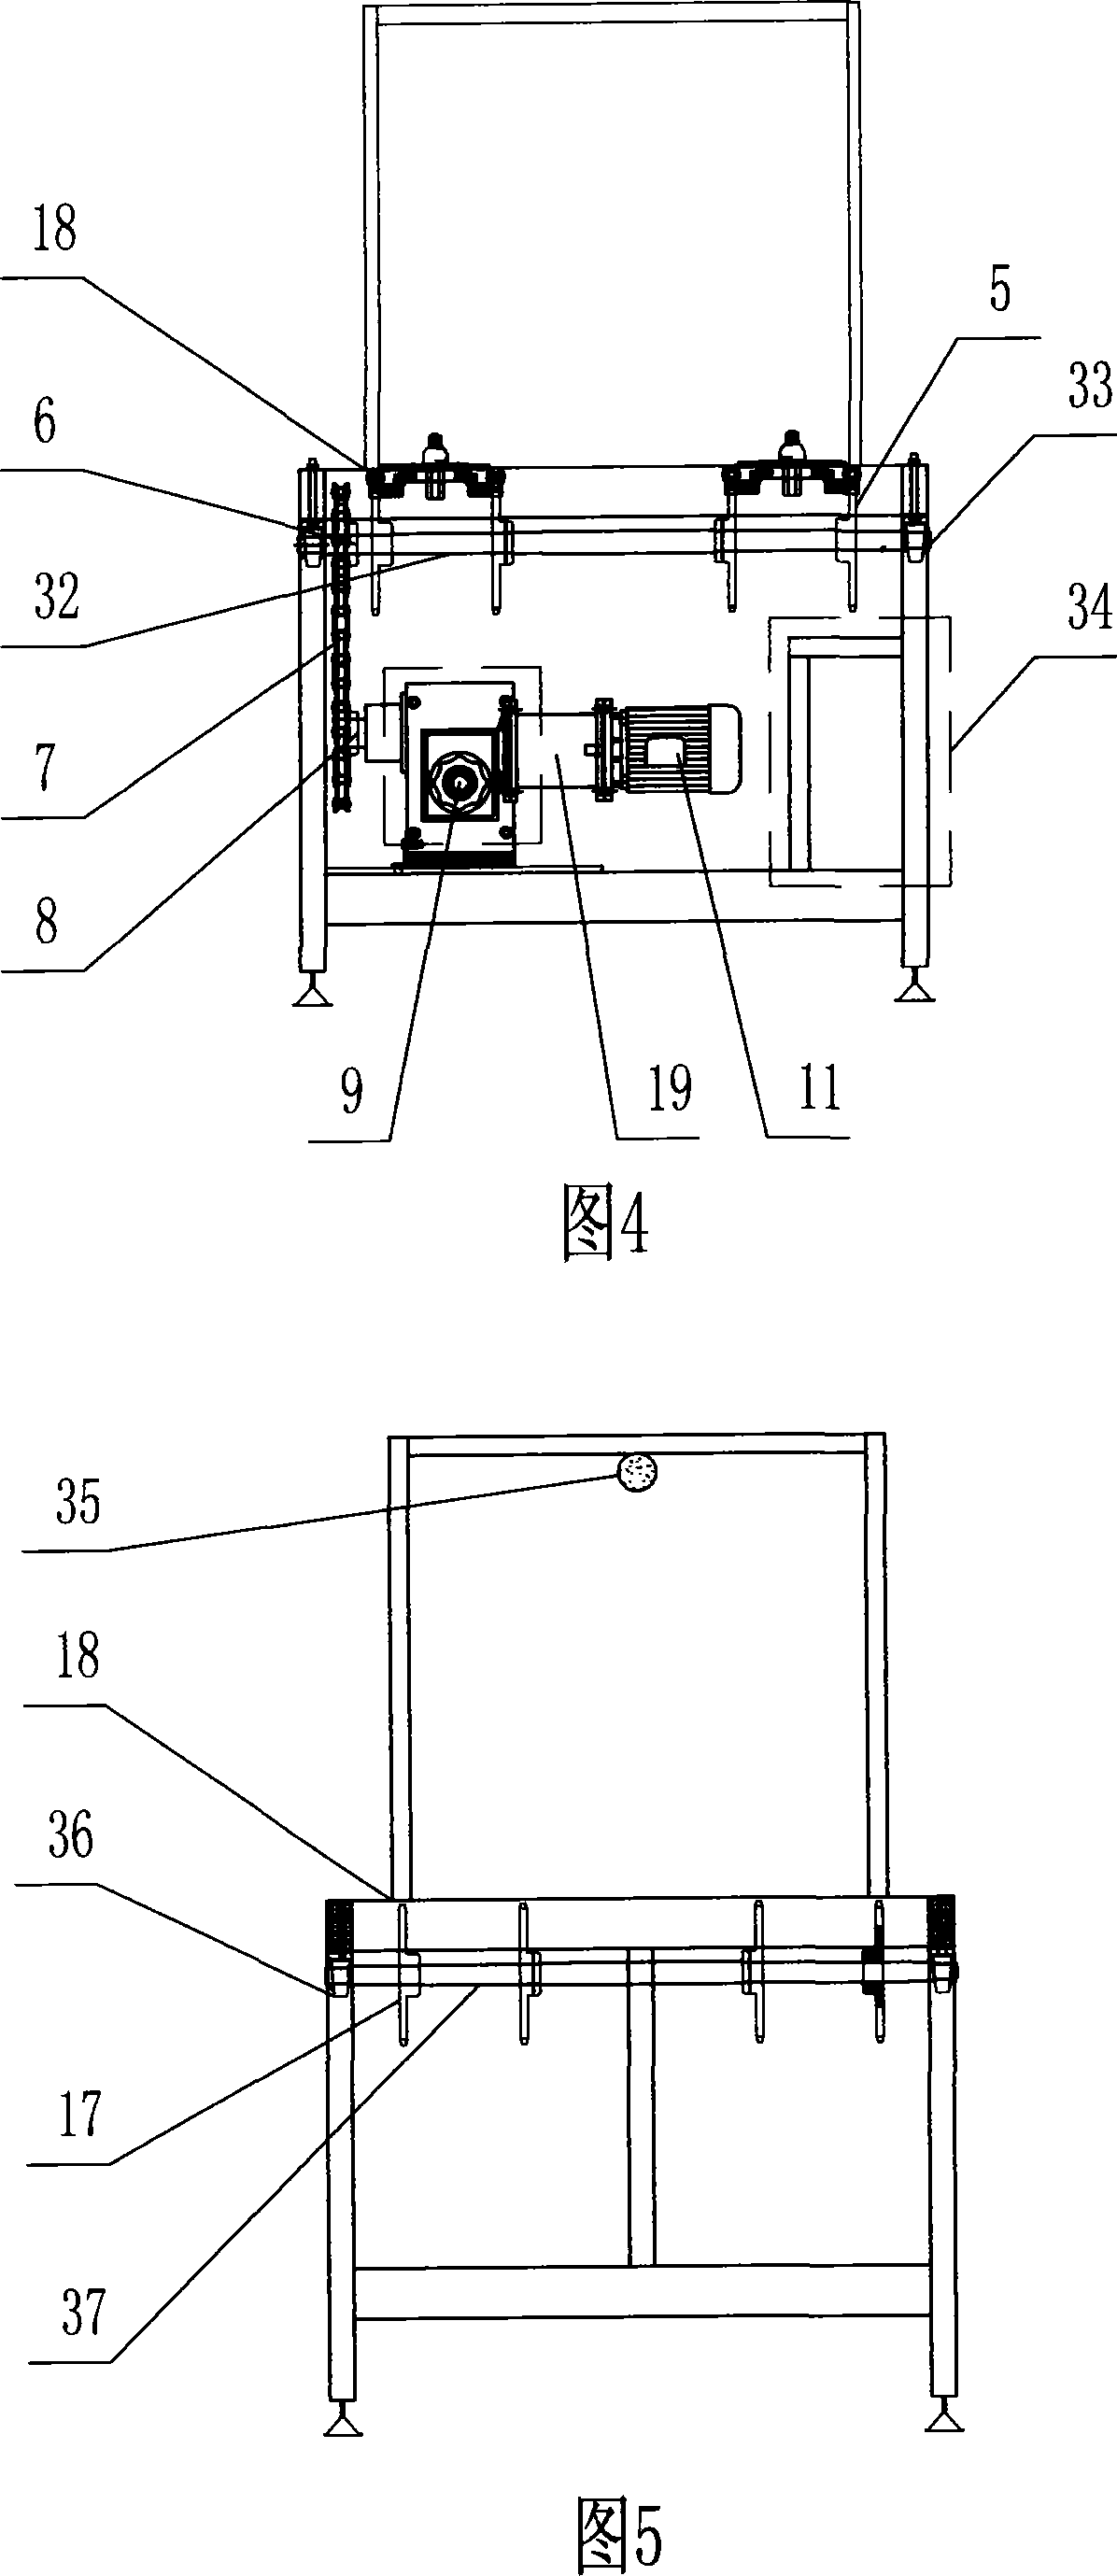 Full-automatic assembly production chain of energy-saving lamp